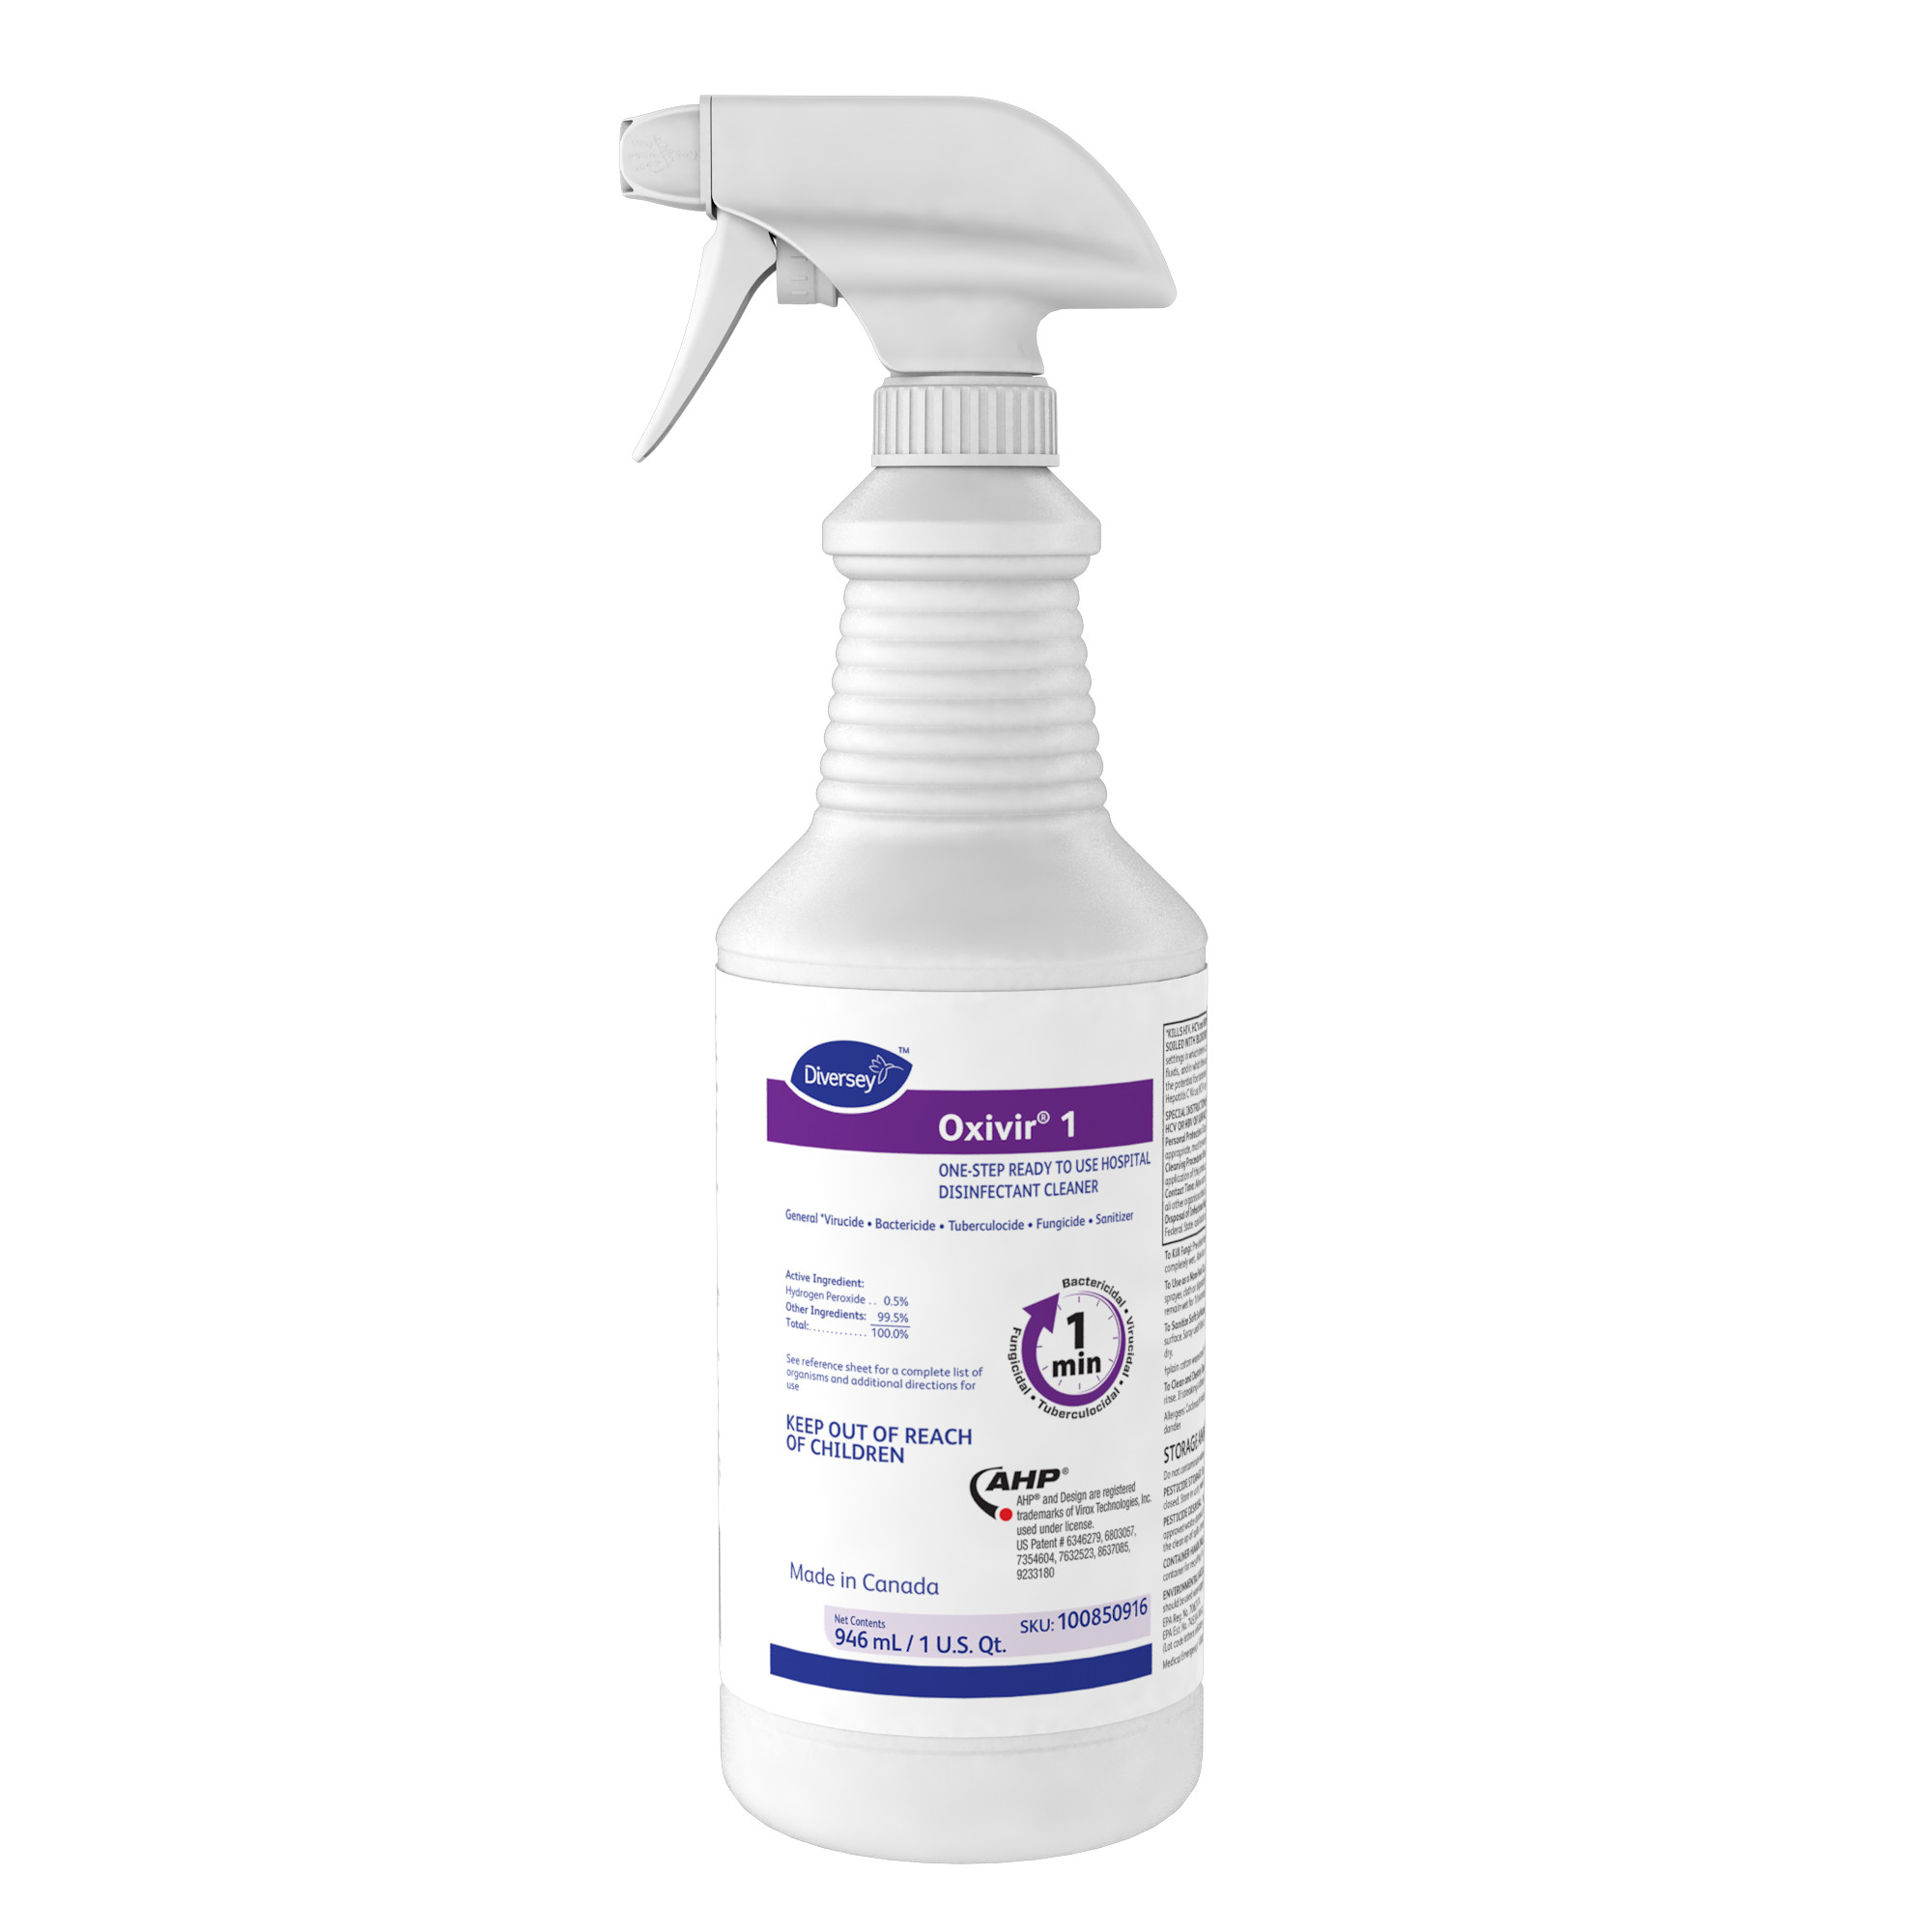 Diversey 100850916 Oxivir® 1 One-Step RTU Hospital Disinfectant Cleaner 32 oz Ready-To-Use Spray Bottle 12/case